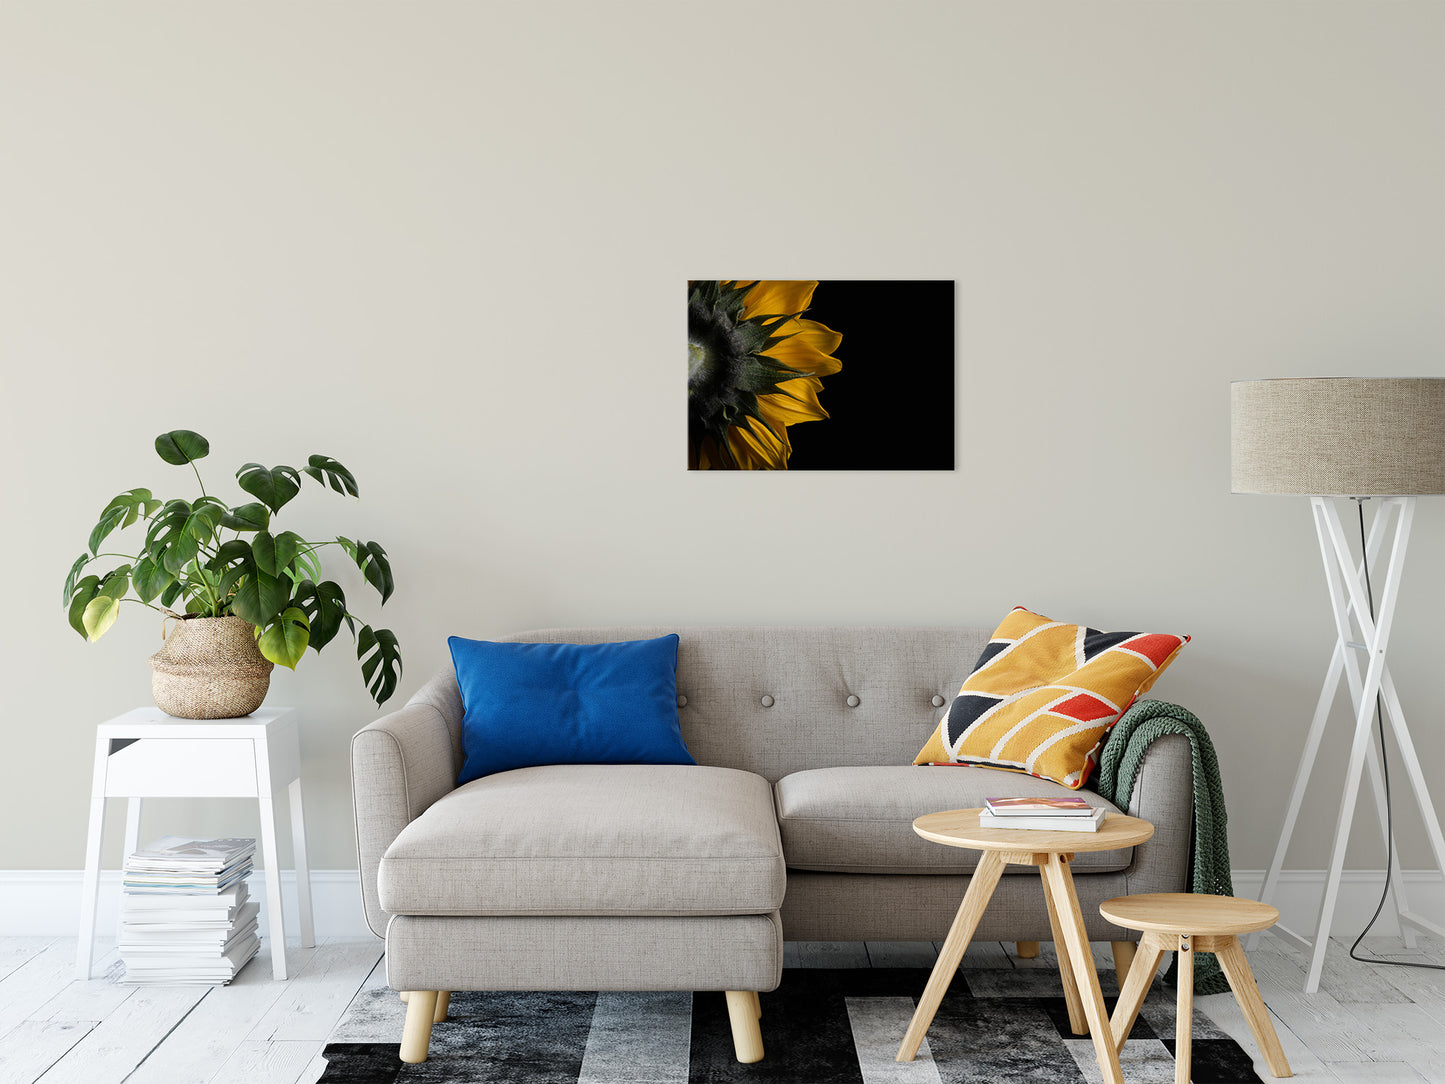 Rustic Sunflower Wall Art: Backside of Sunflower Nature / Floral Photo Fine Art Canvas Wall Art Prints 20" x 24" - PIPAFINEART